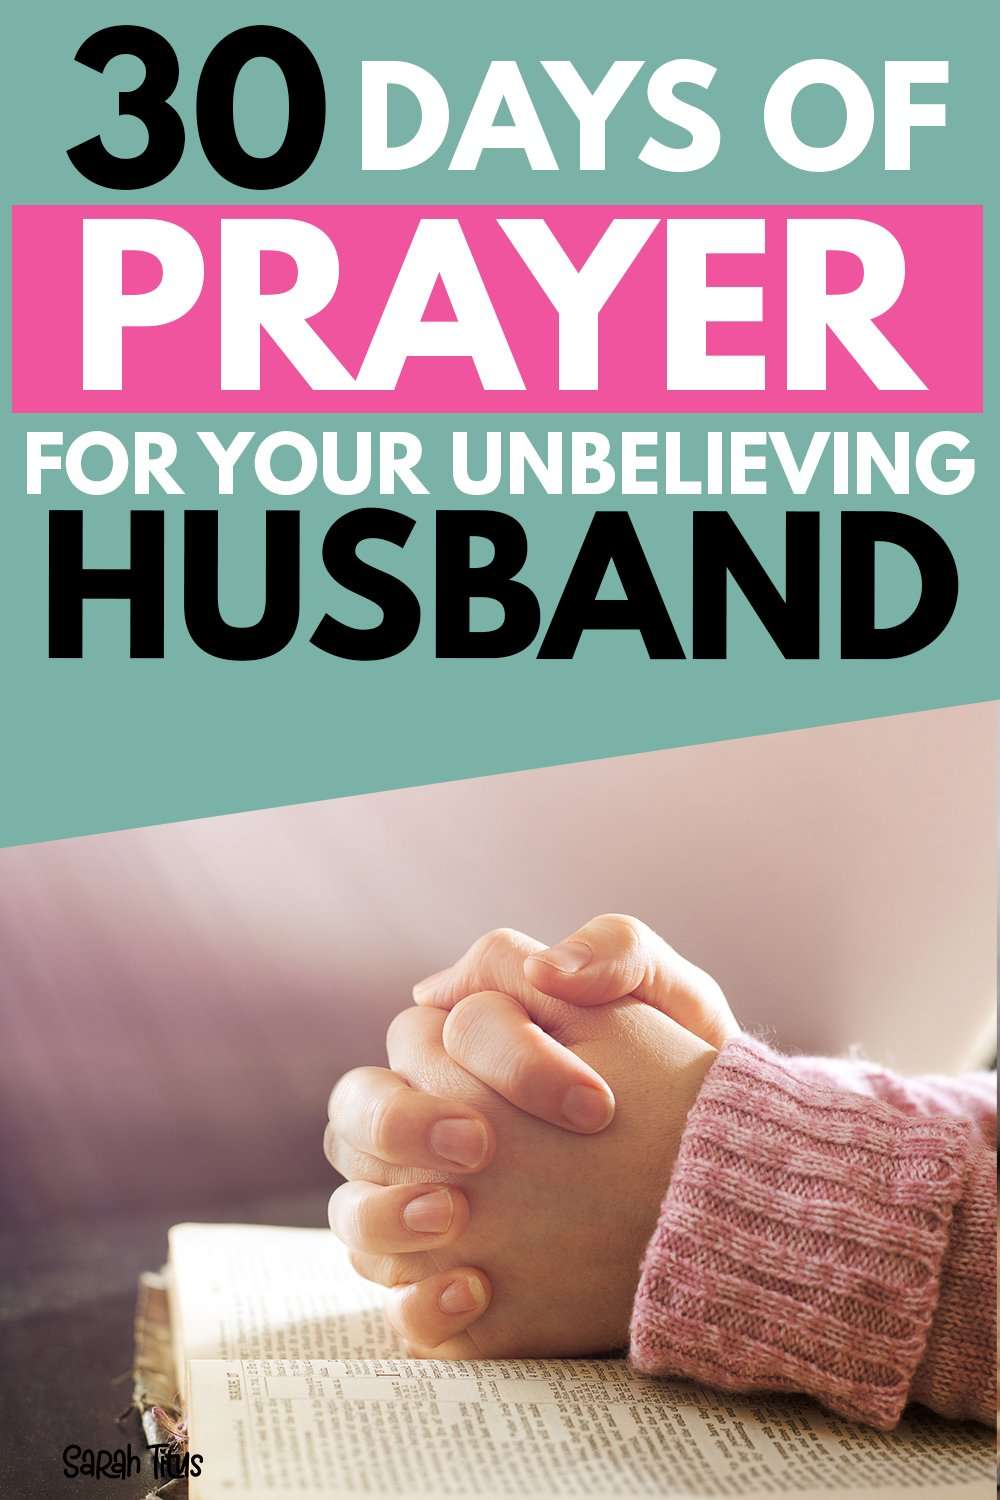 30 Days of Prayer for Your Unbelieving Husband